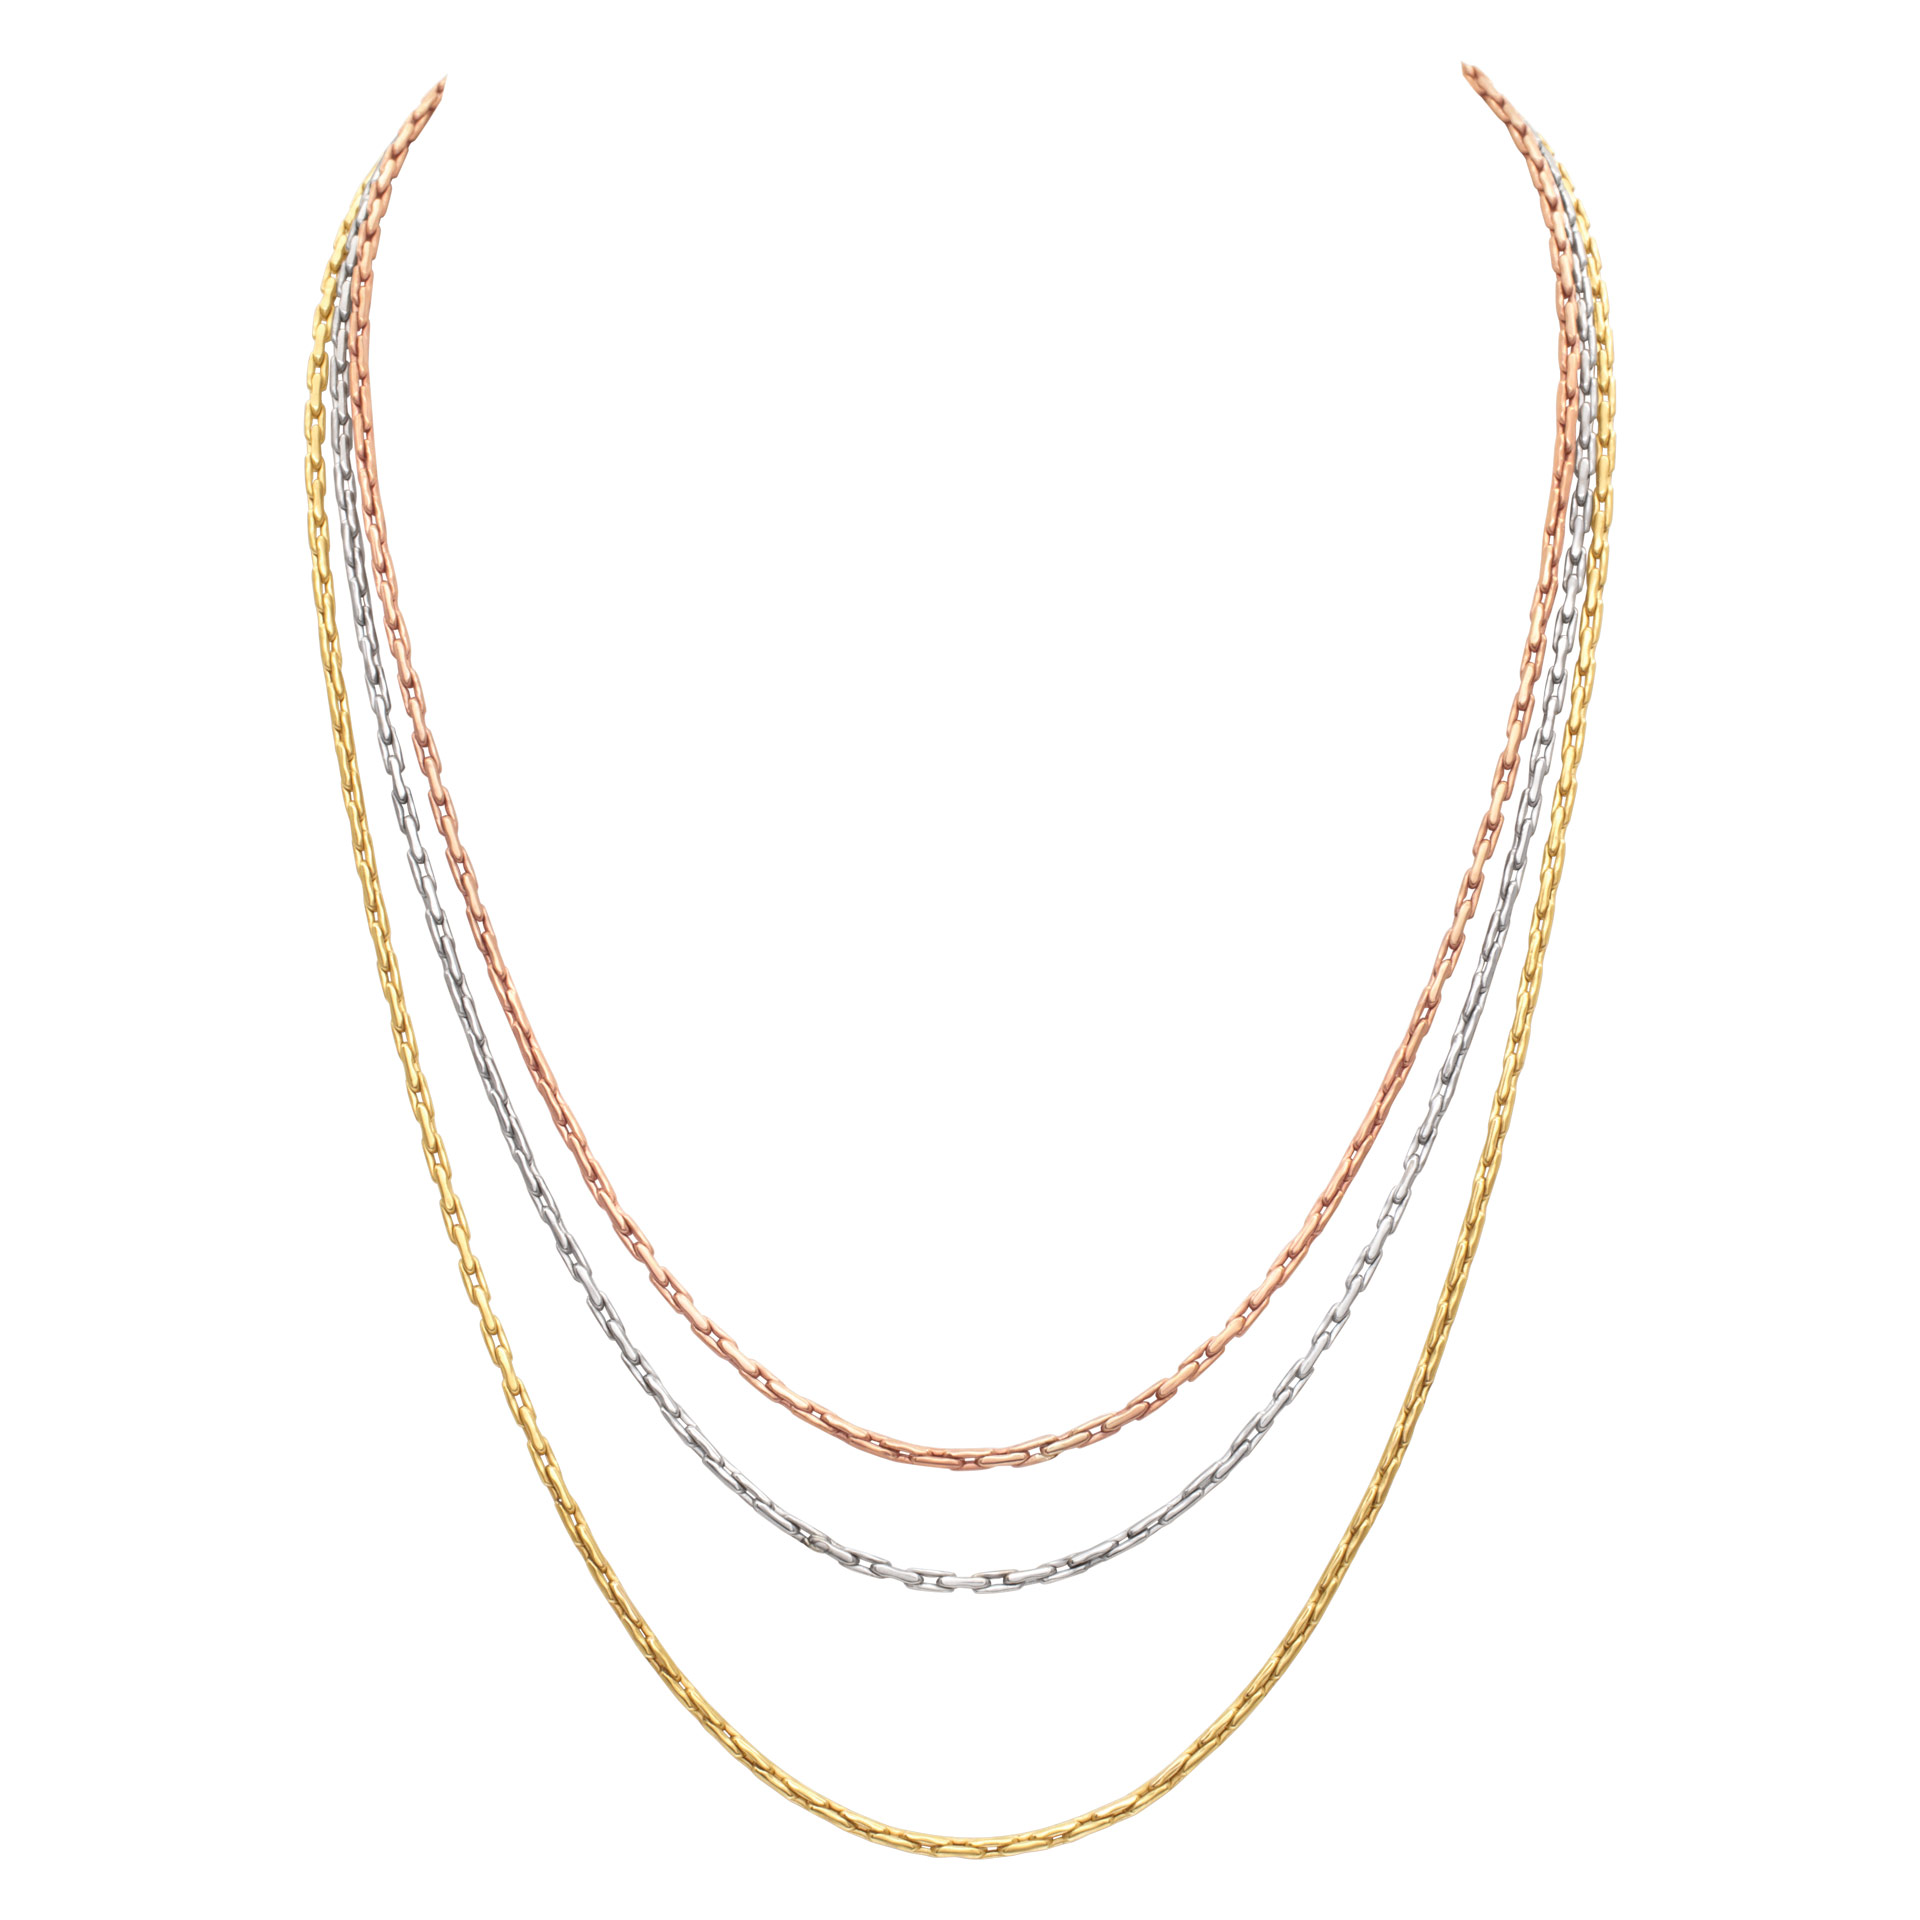 Multi color three row chain necklace in 14k white, yellow and rose gold